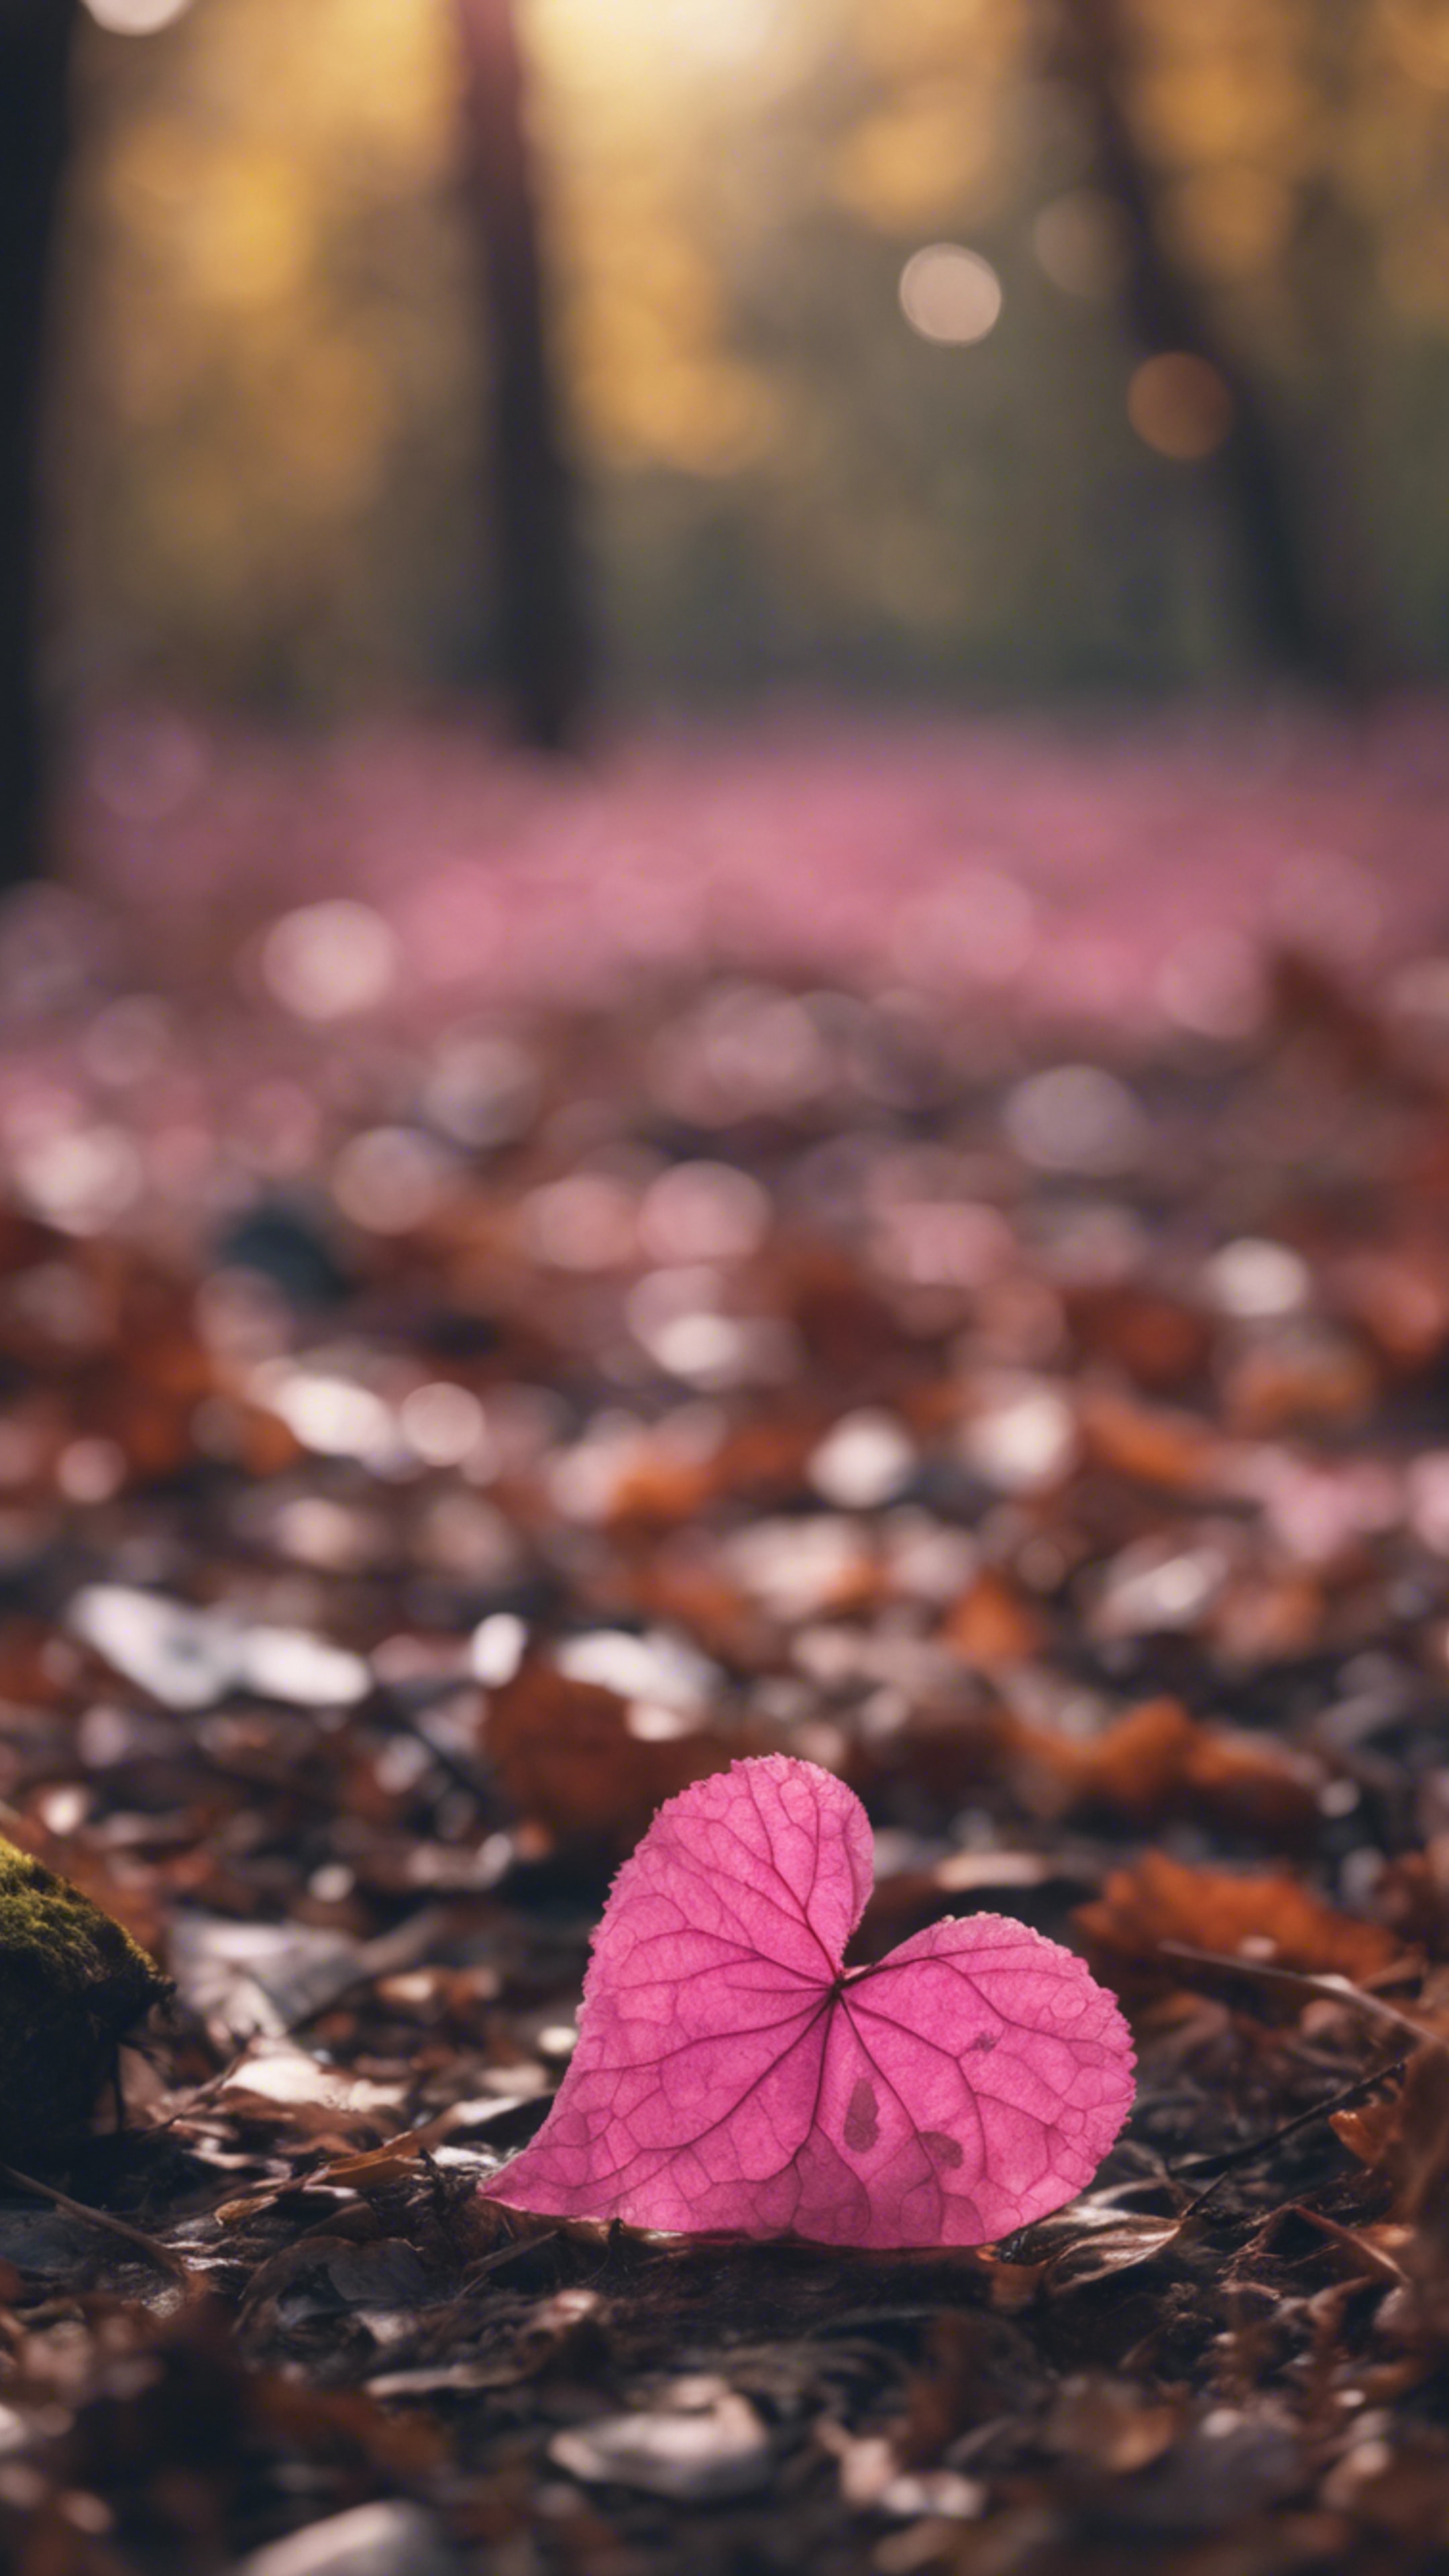 A lonely pink heart-shaped leaf fallen on the forest floor.壁紙[094e2266ff00495d8fee]